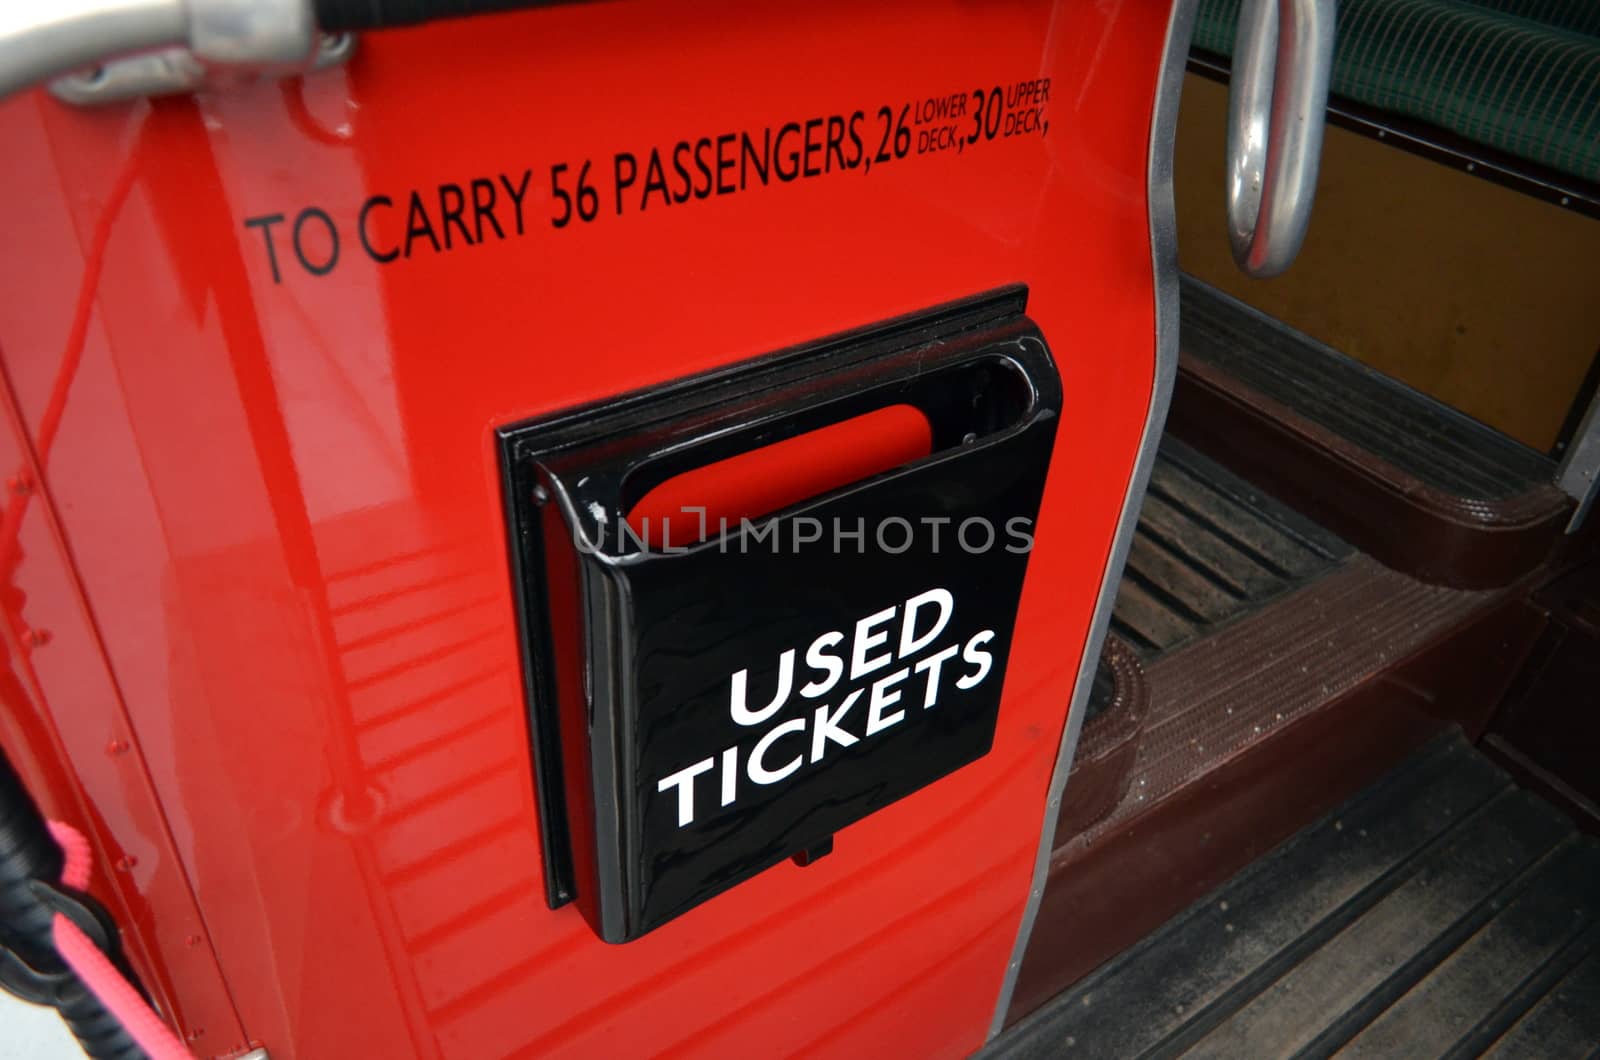 Used ticket bin by bunsview